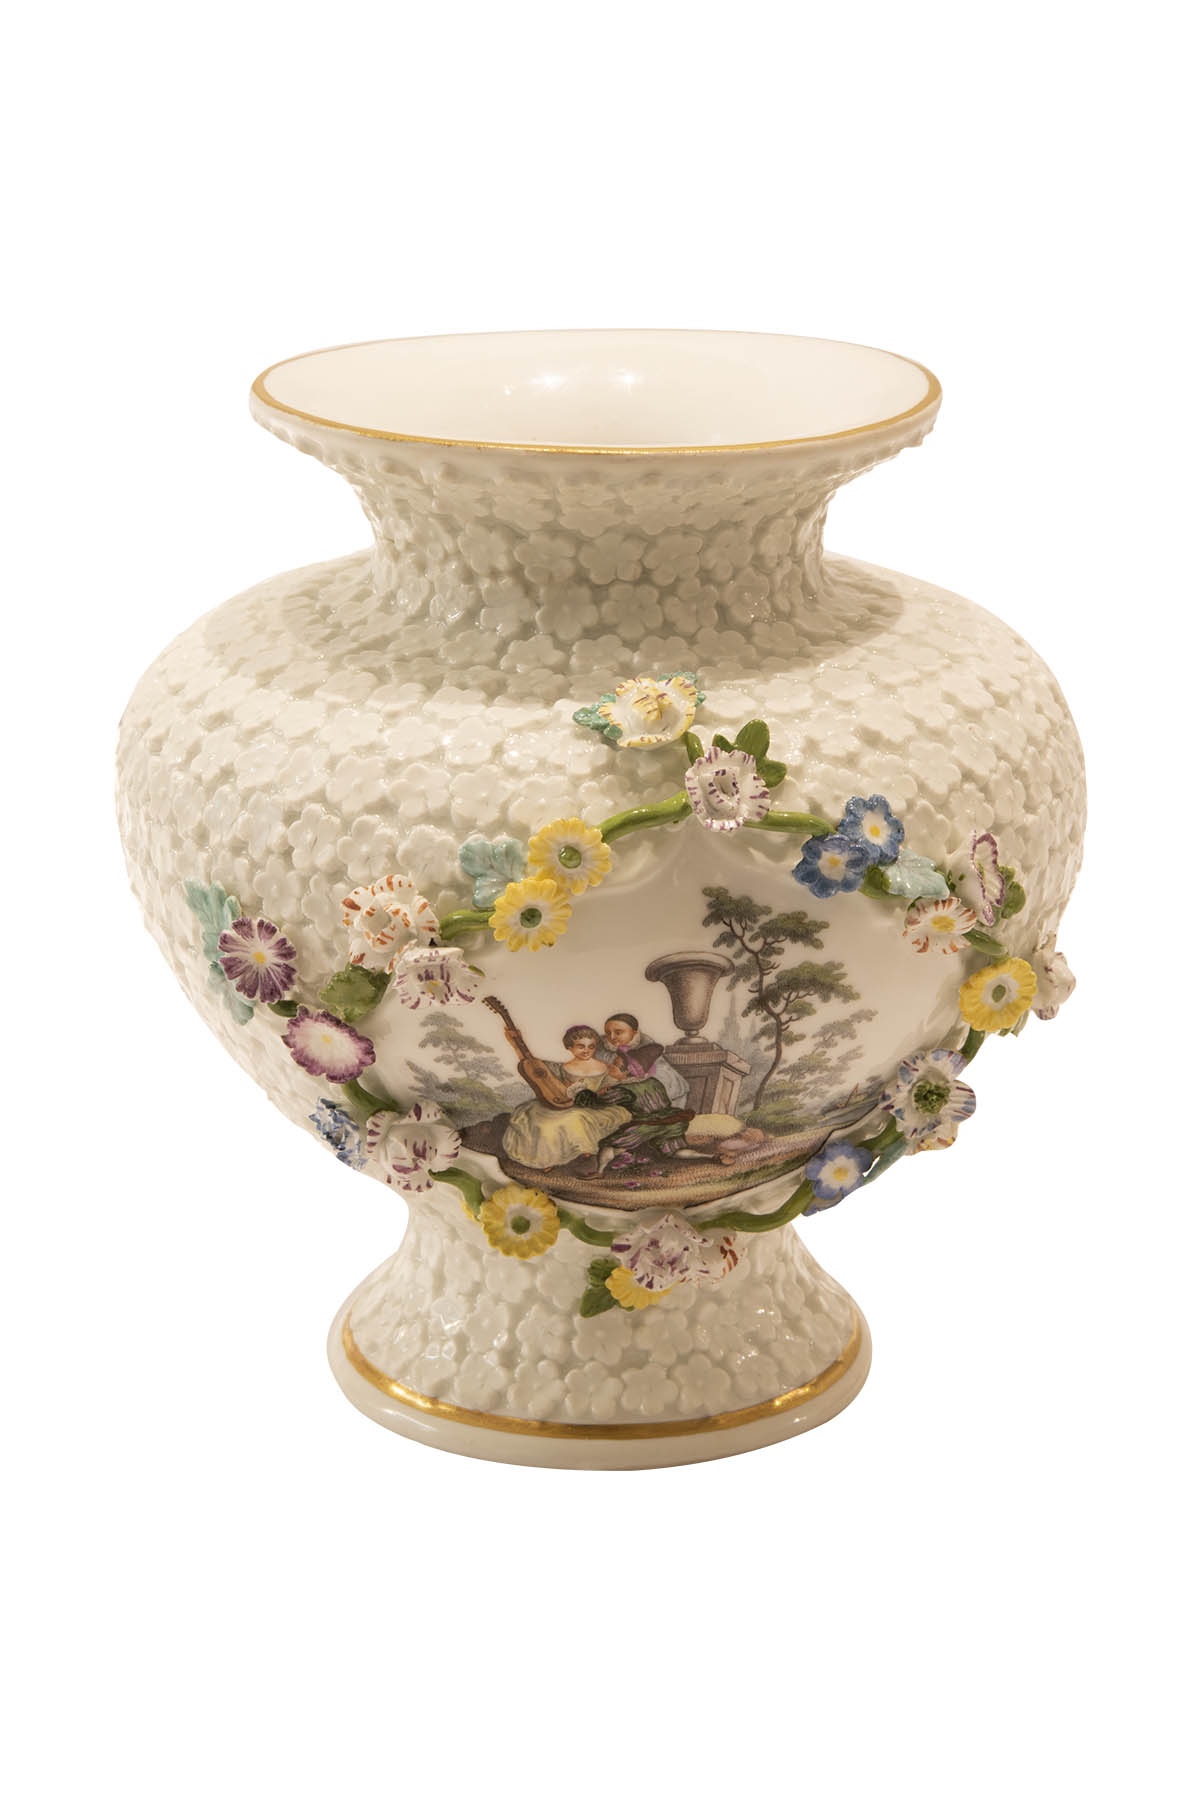 Ornamental vase with forget-me-not decor, Meissen 1740 - Image 3 of 6